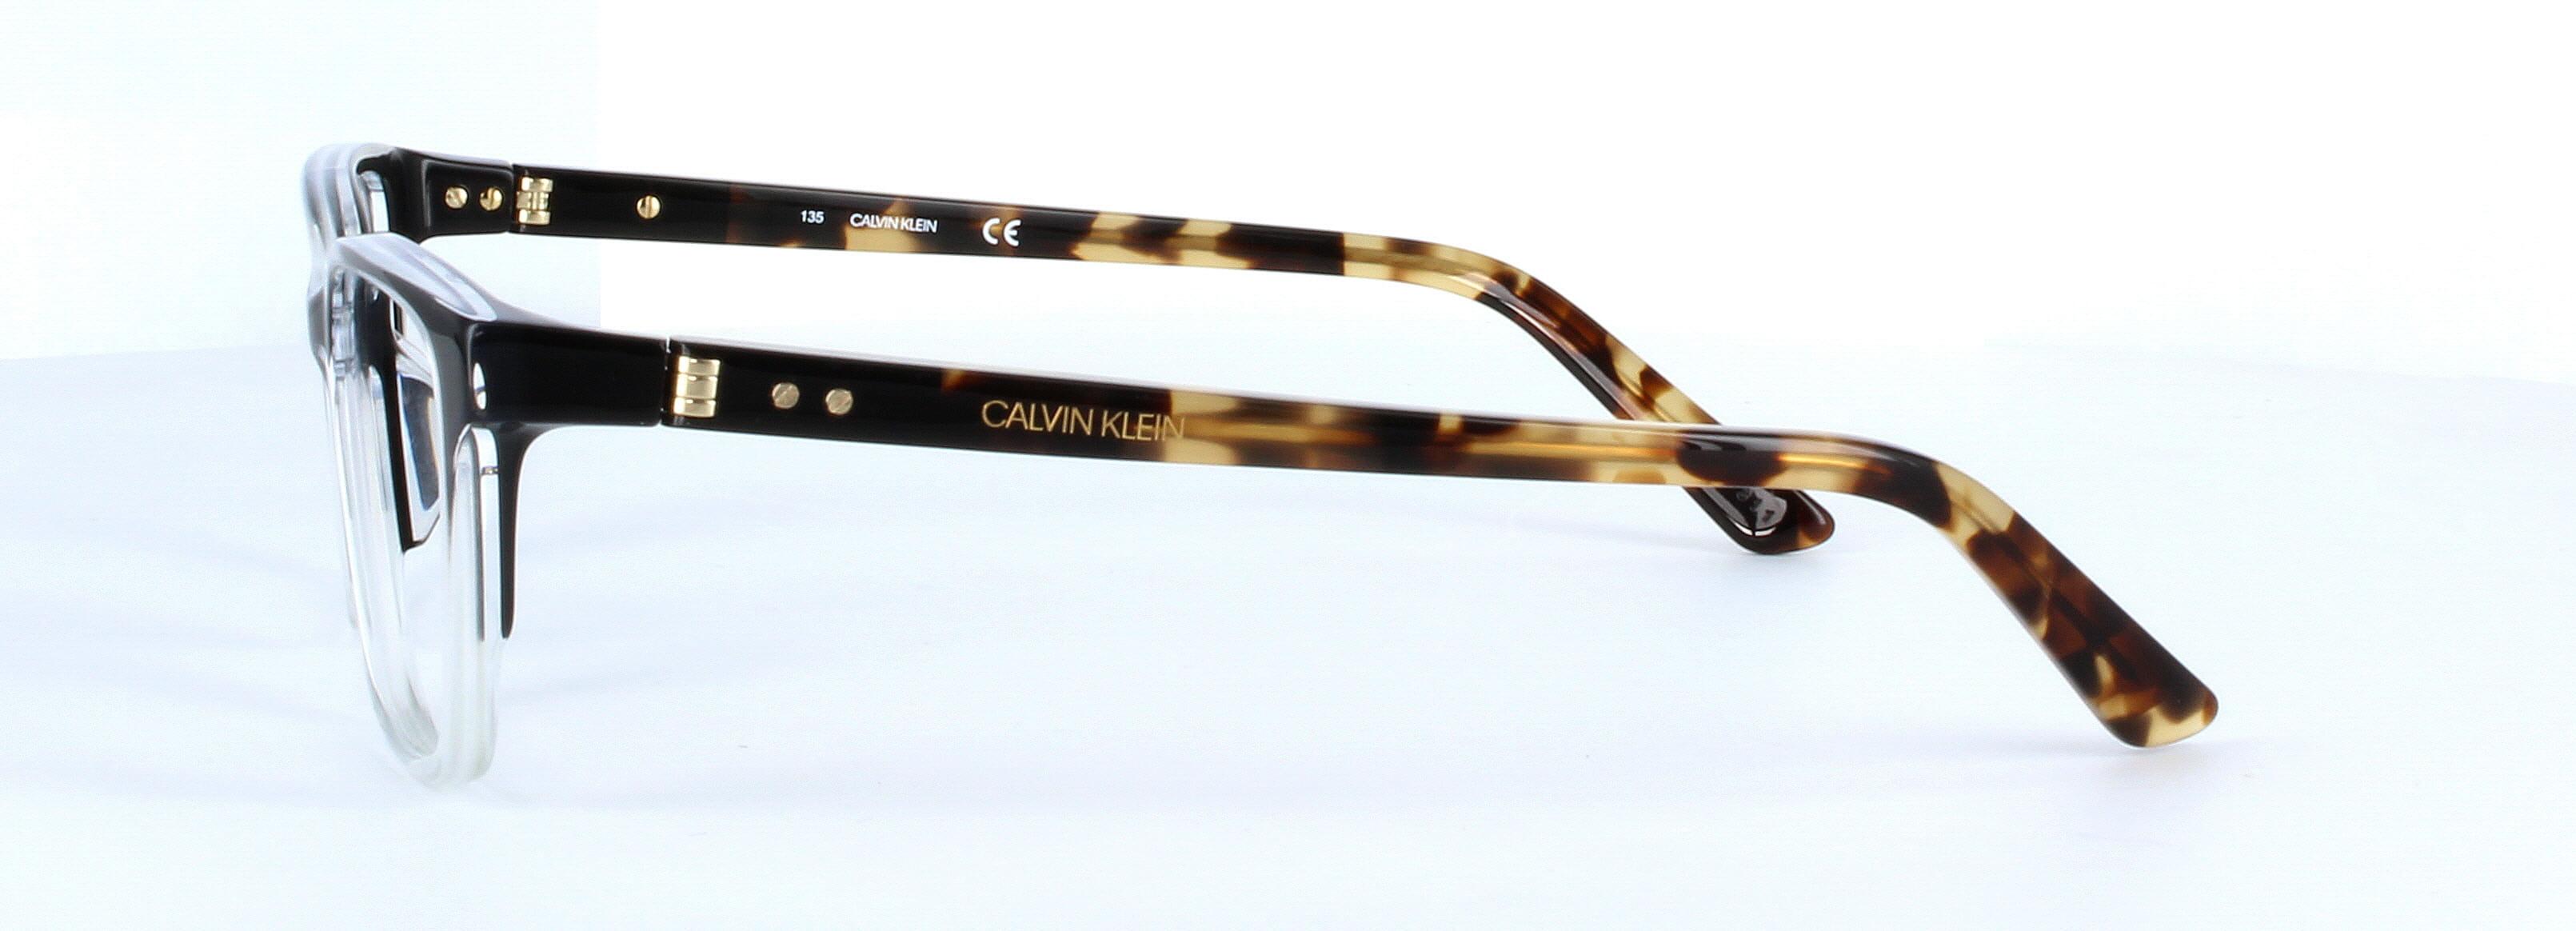 CK19506-095 - Unisex 2-tone acetate glasses with spring hinged arms - Black & crystal - image view 2